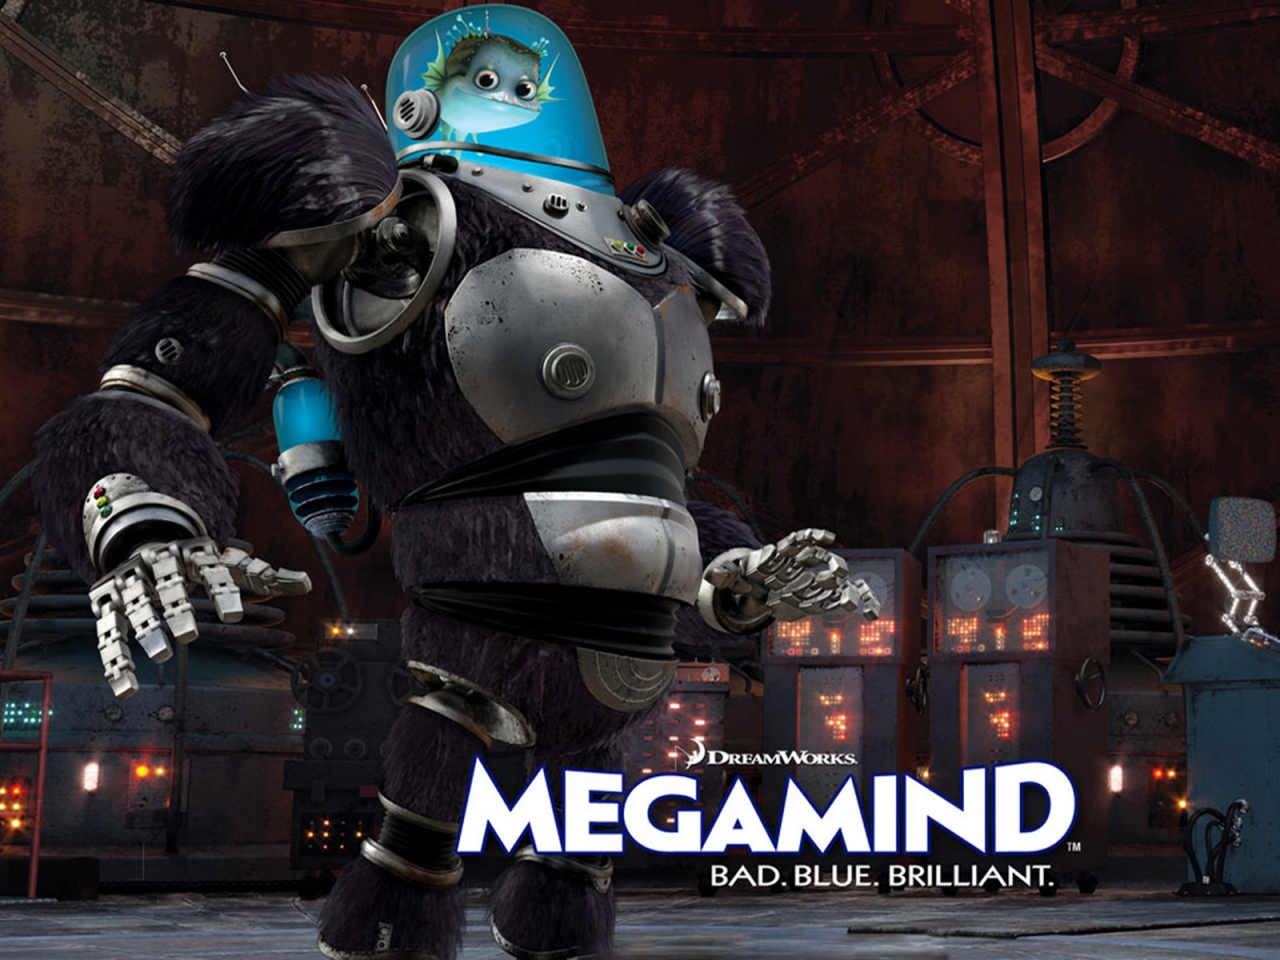 Megamind Minion for 1280 x 960 resolution